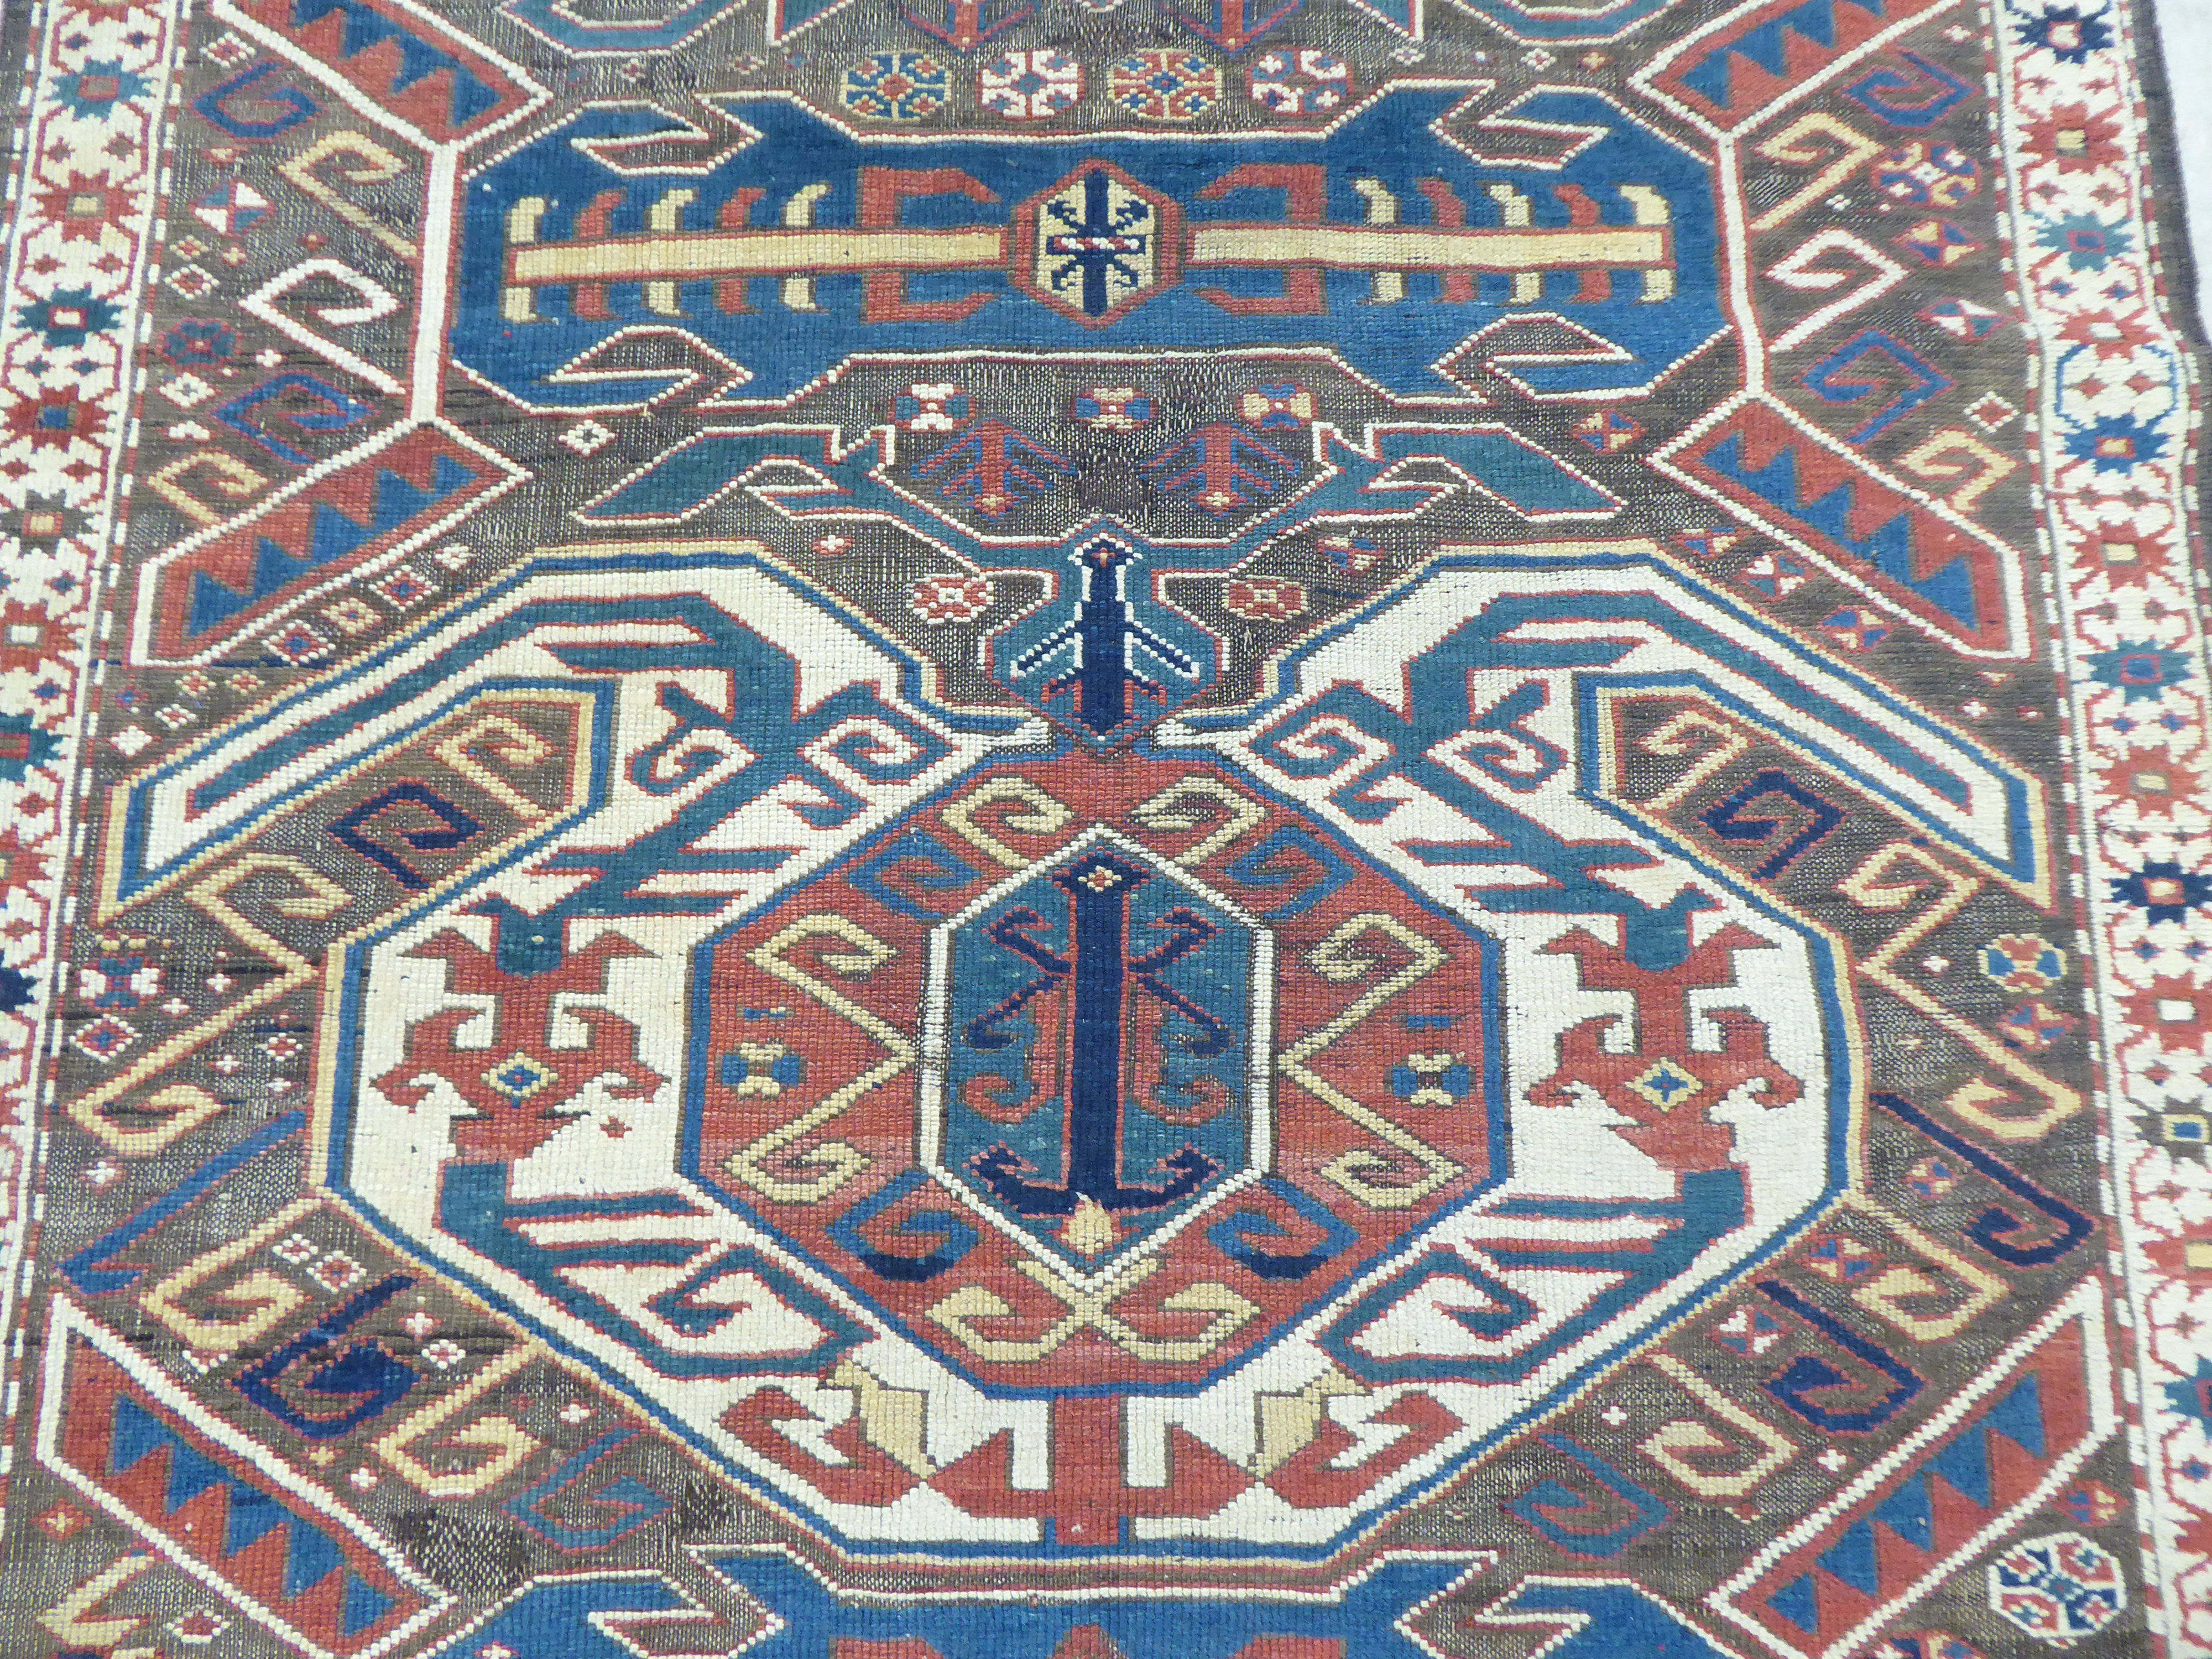 A Turkish Kilim style runner, decorated with repeating stylised designs, on a multi-coloured ground - Image 2 of 4